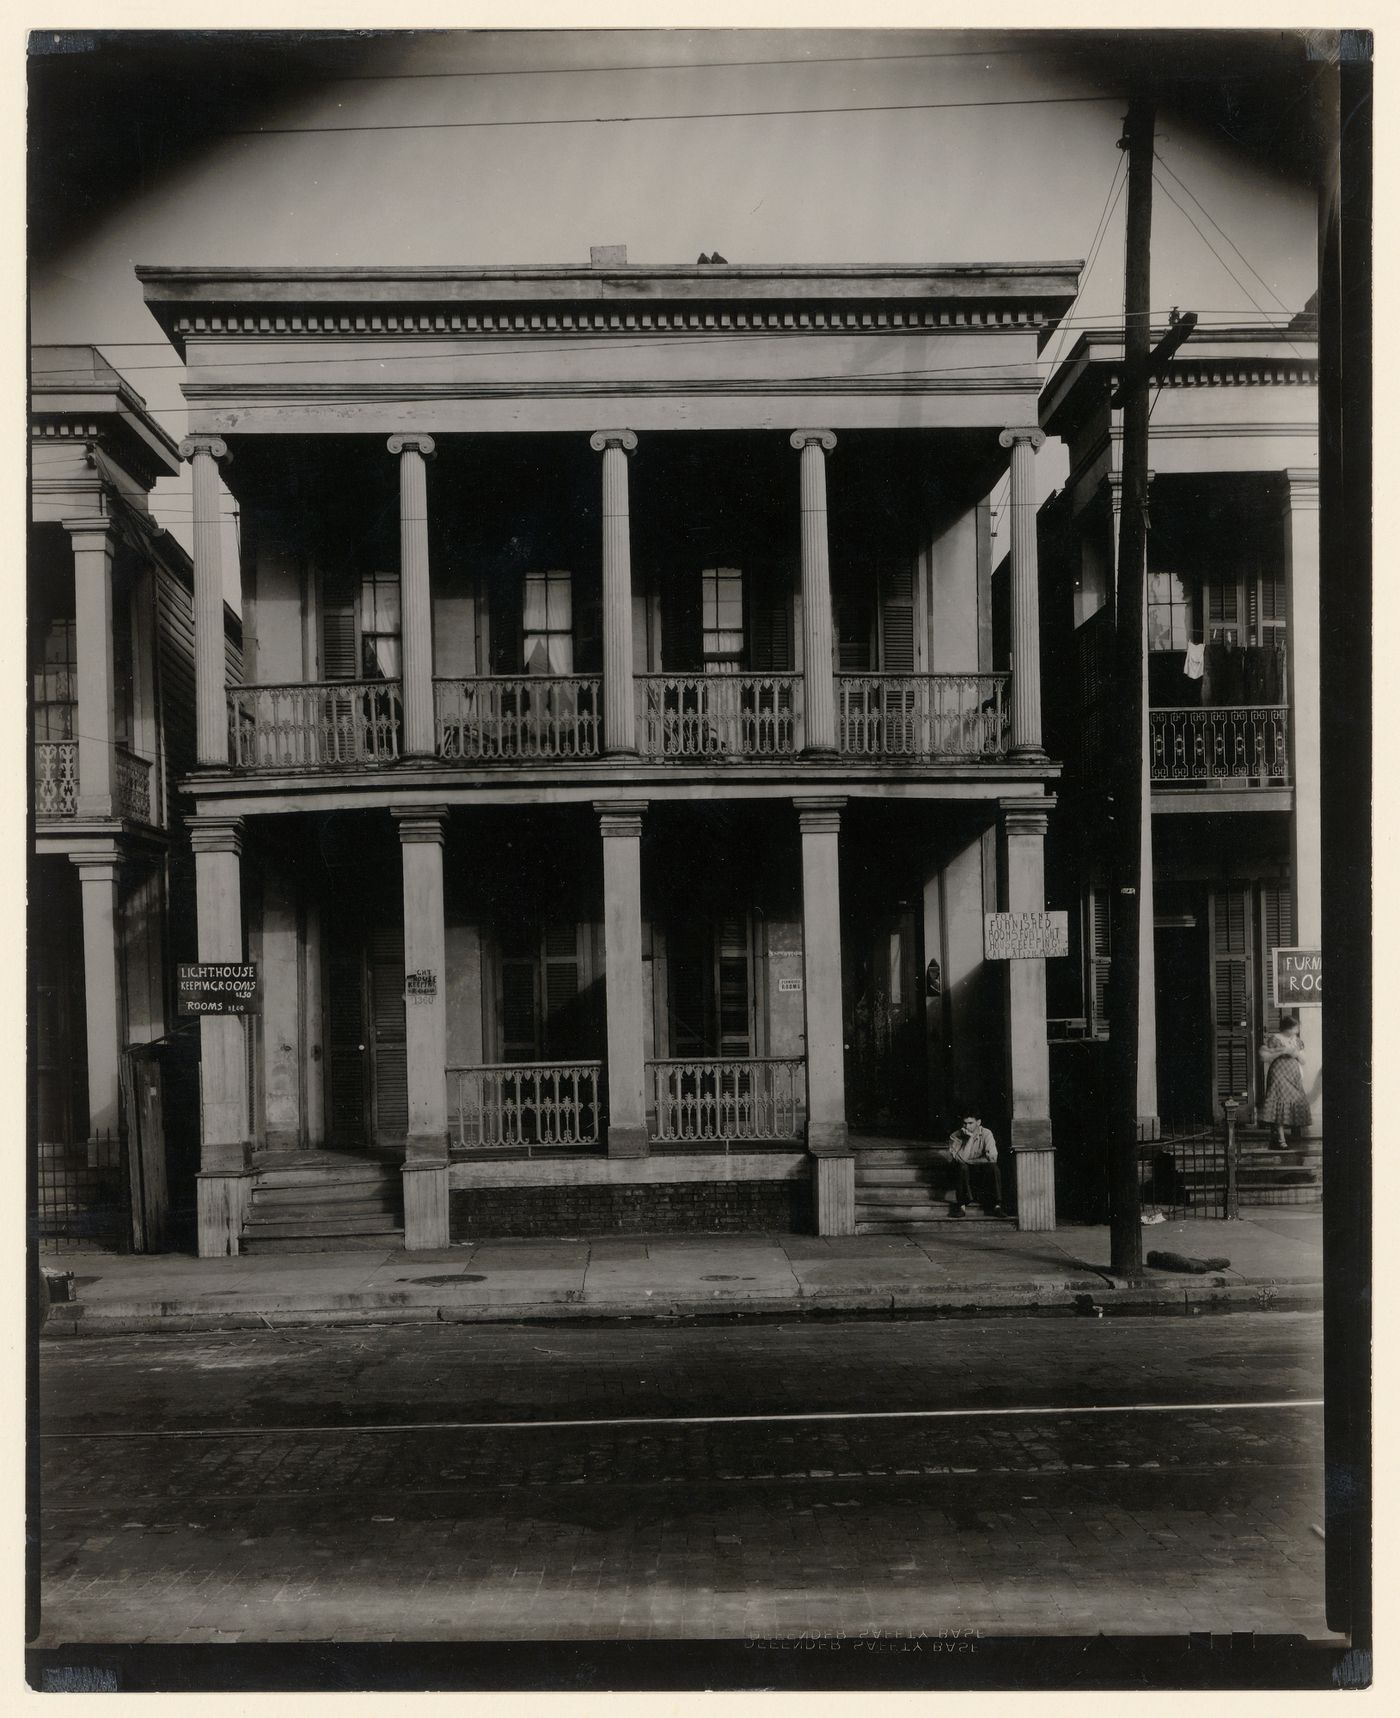 Boarding house: front view, man seated on steps, two-story house, women standing on step on the right, New Orleans